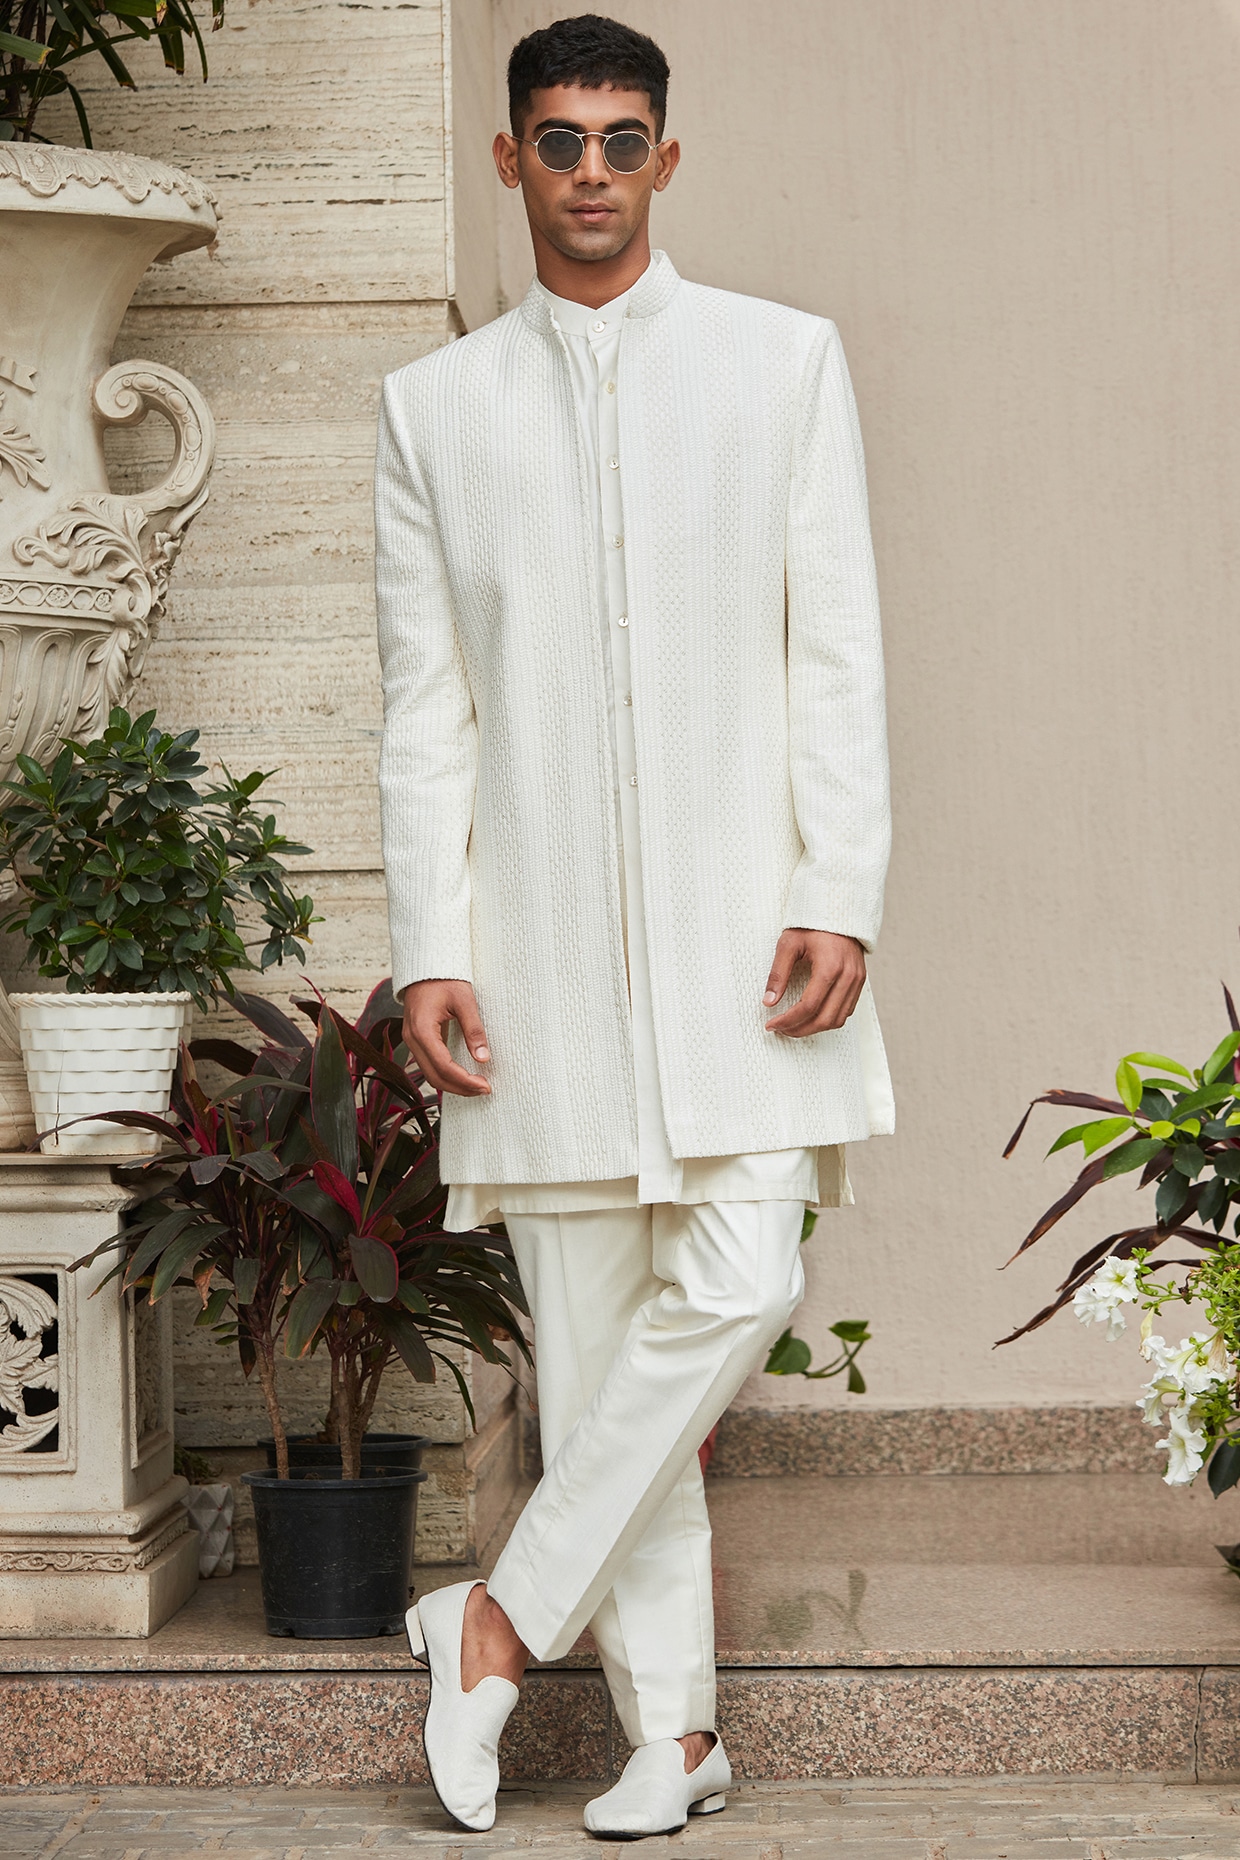 Buy ZAHID Men's Indo Western White Sherwani With Pant Set Wedding Dress  Anniversary Party Dress Set for Men Ethnic Wear (42) at Amazon.in